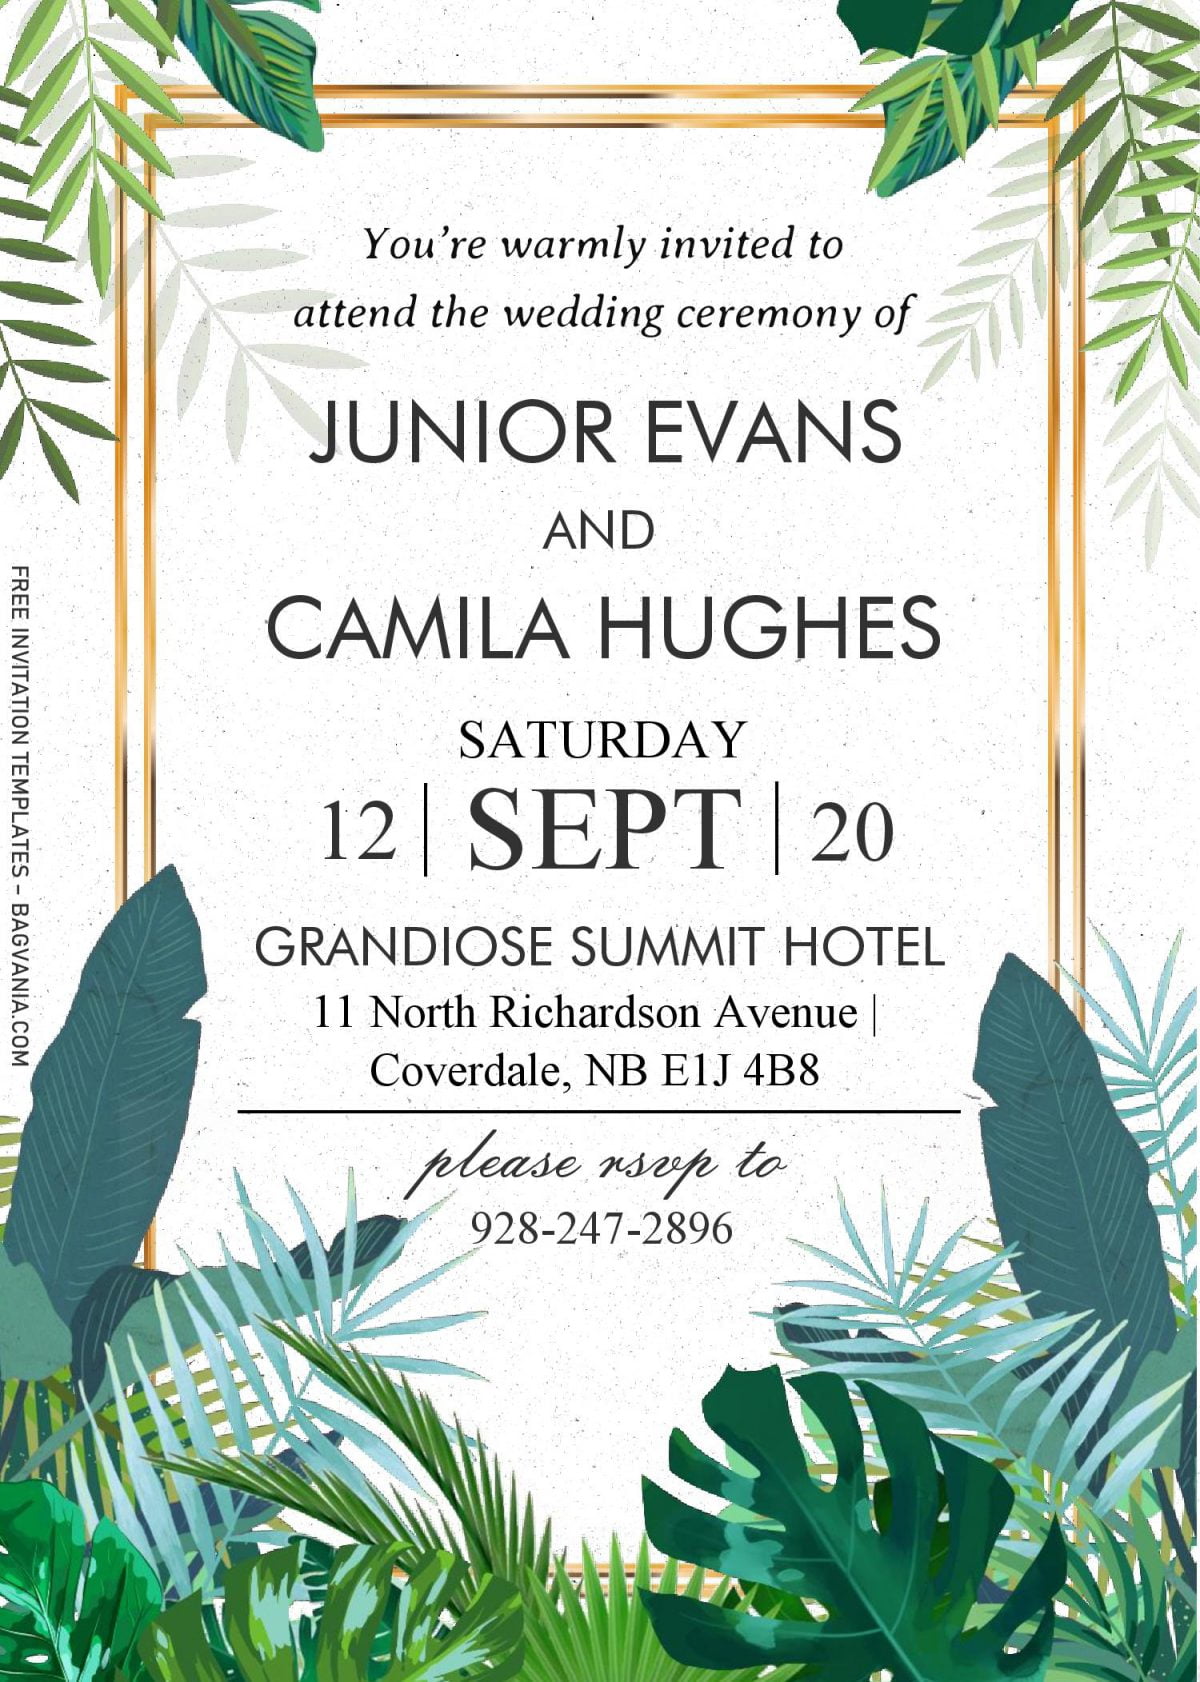 Tropical Leaves Invitation Templates - Editable With MS Word and has green foliage